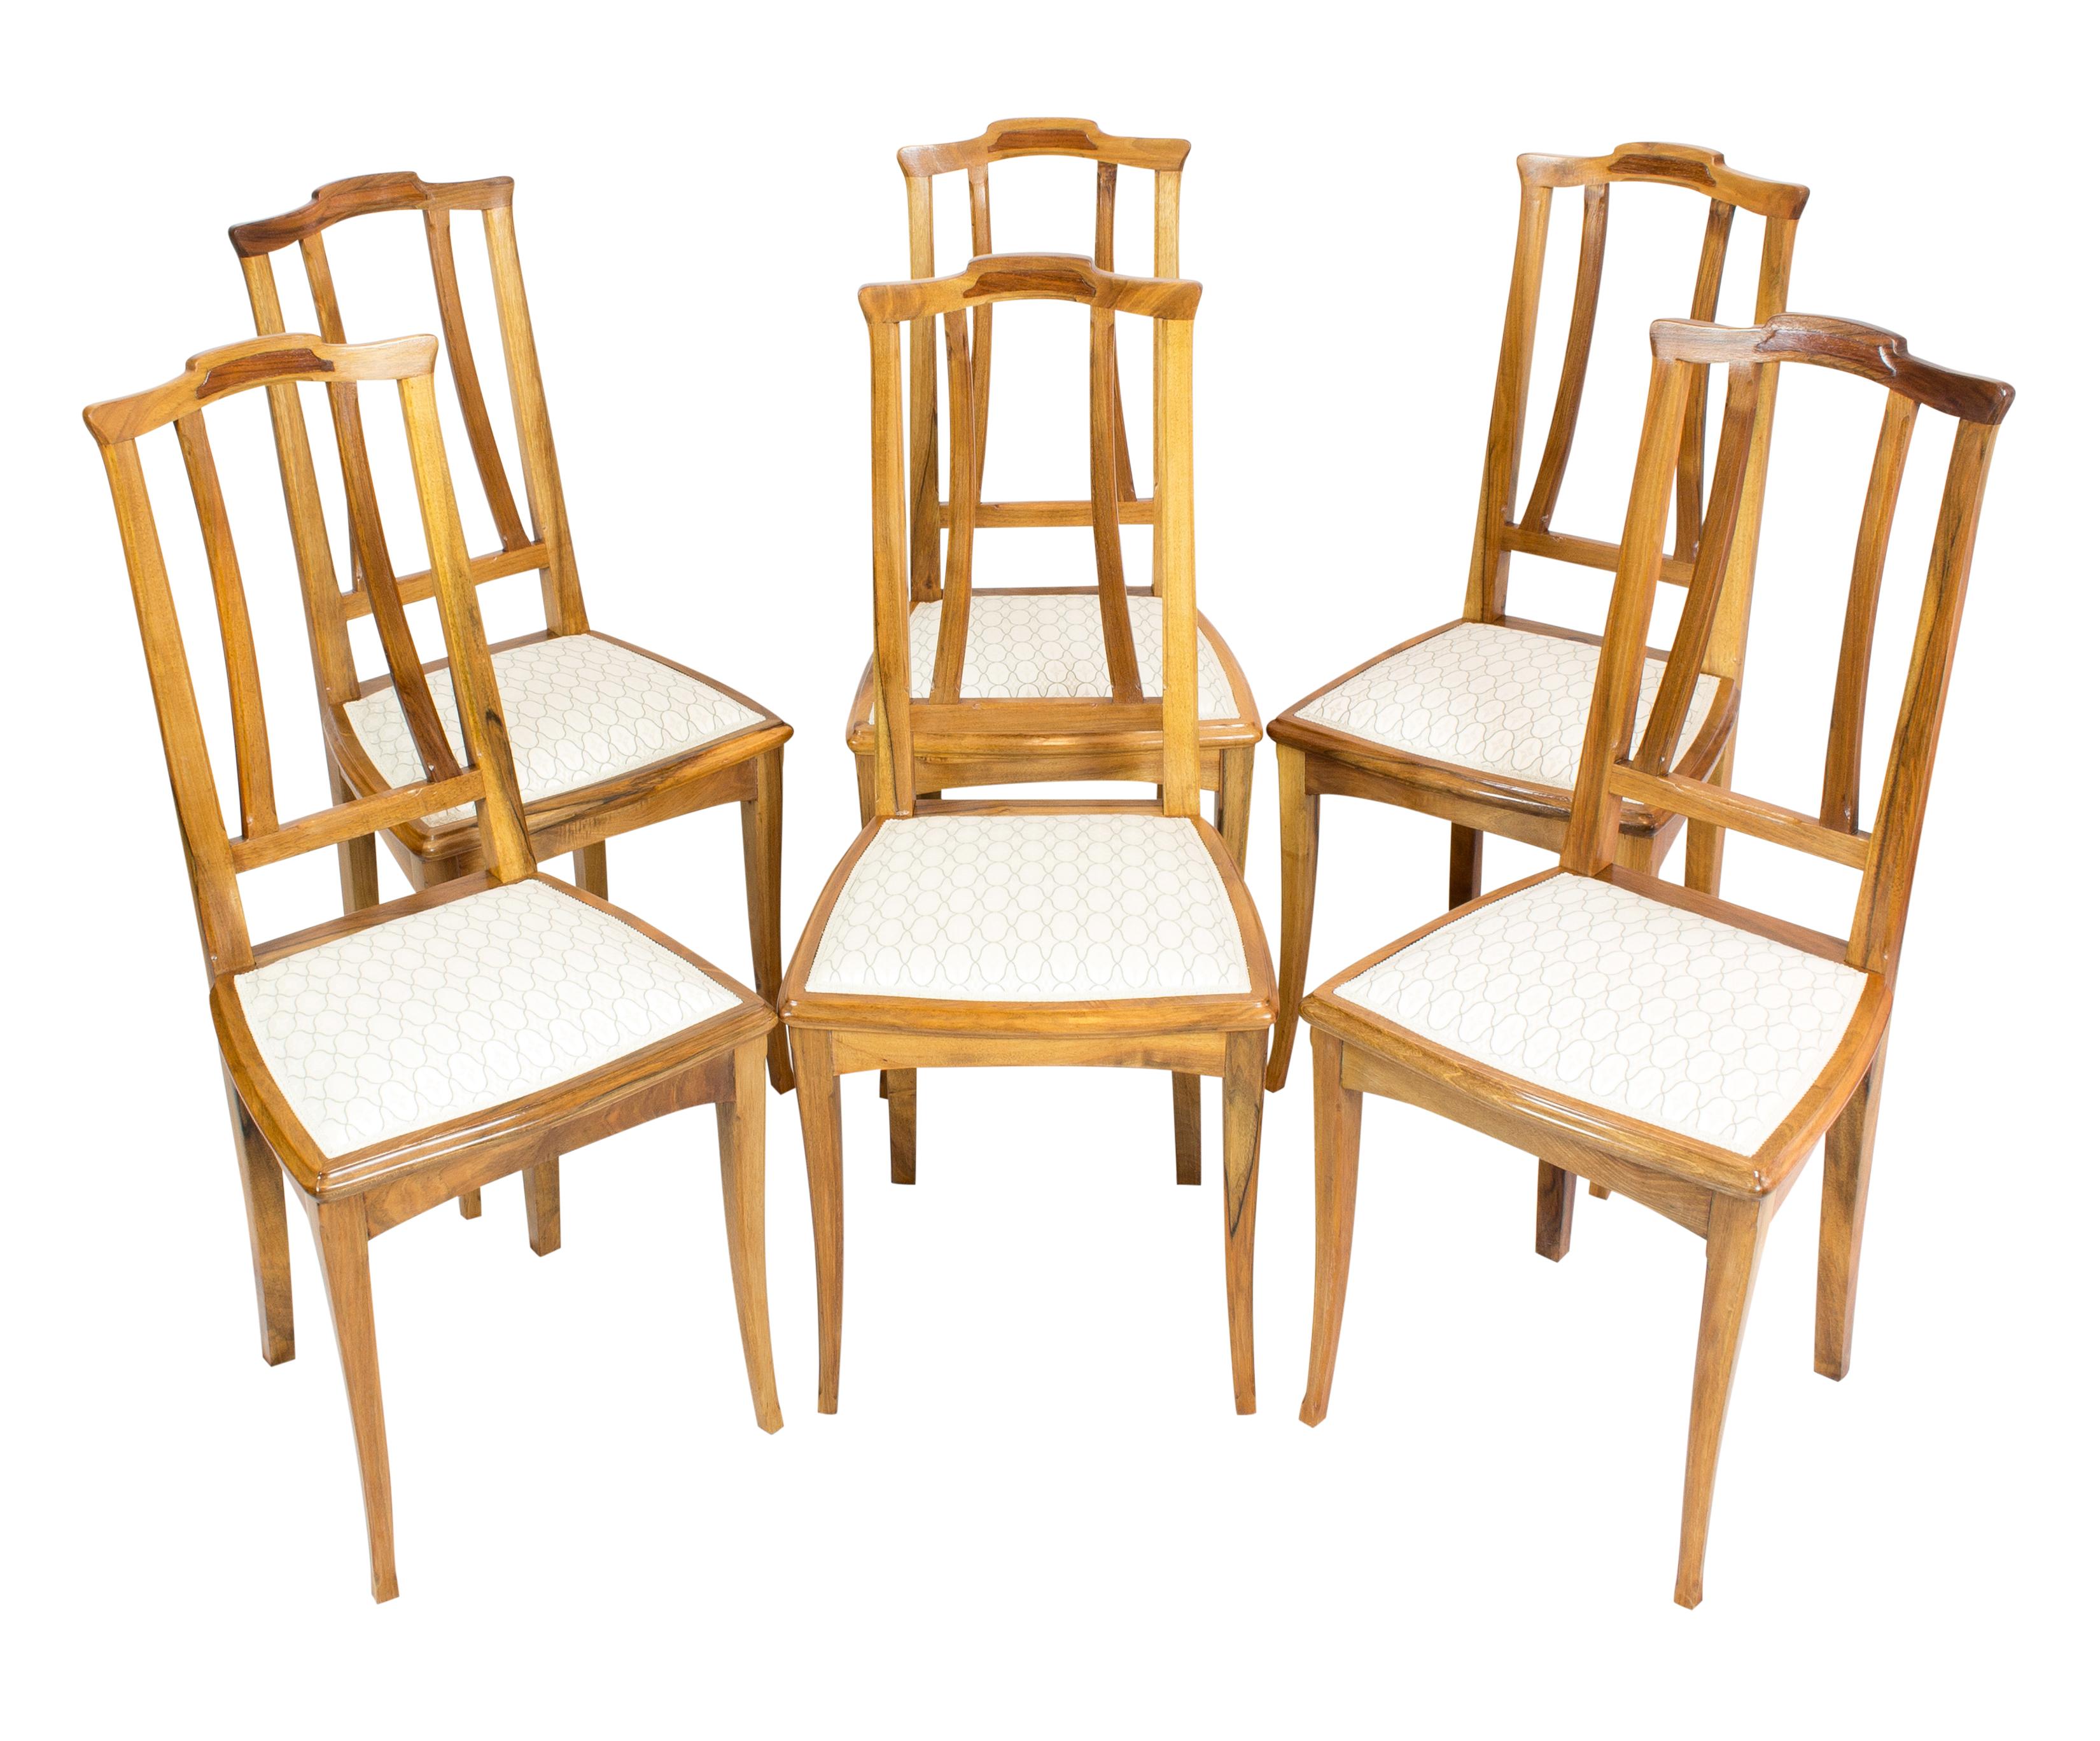 Set of six chairs, Art Nouveau circa 1900, solid walnut. The chairs were new re-upholstered and covered with new fabric.
In very good restored condition.
Seat height: 46 cm.